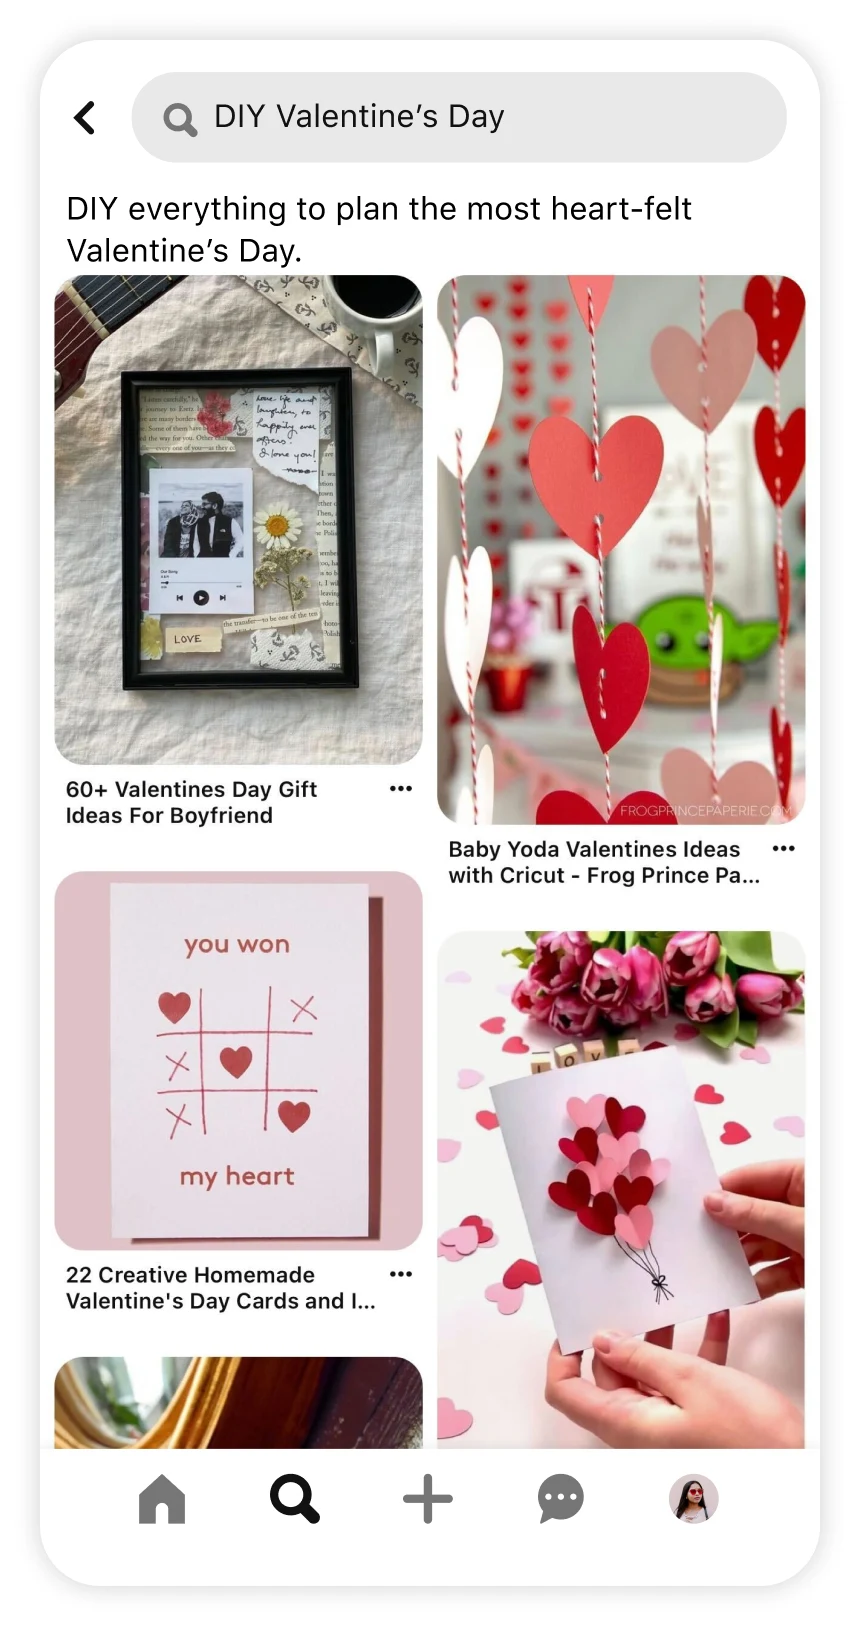 Screen shot of Pinterest app showing trend article for DIY Valentine's Day